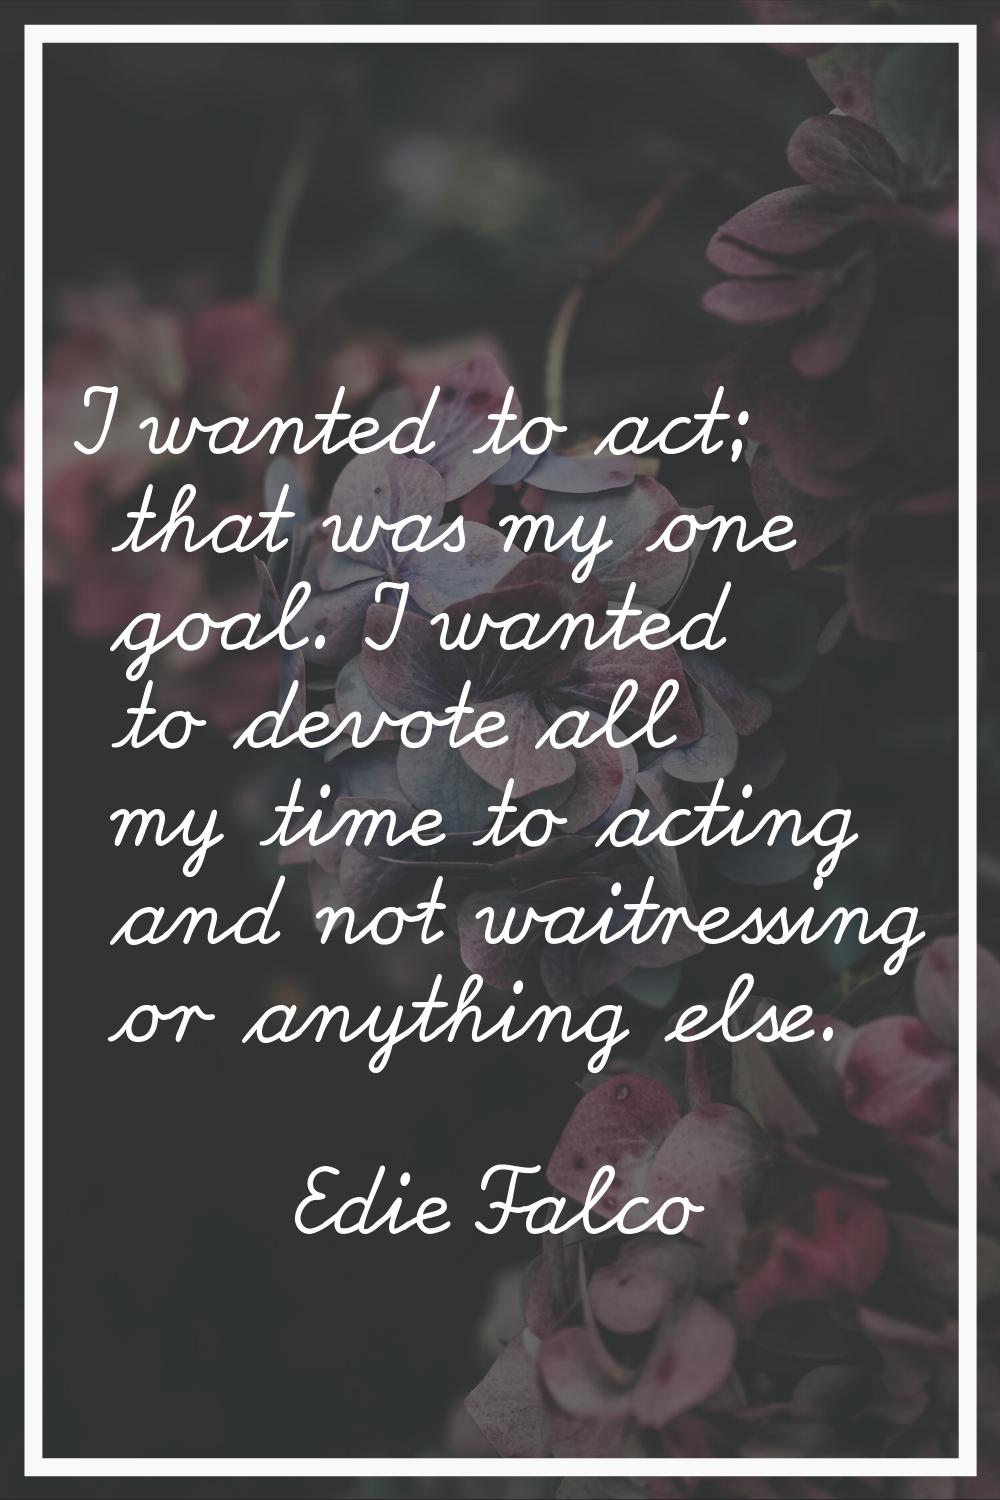 I wanted to act; that was my one goal. I wanted to devote all my time to acting and not waitressing